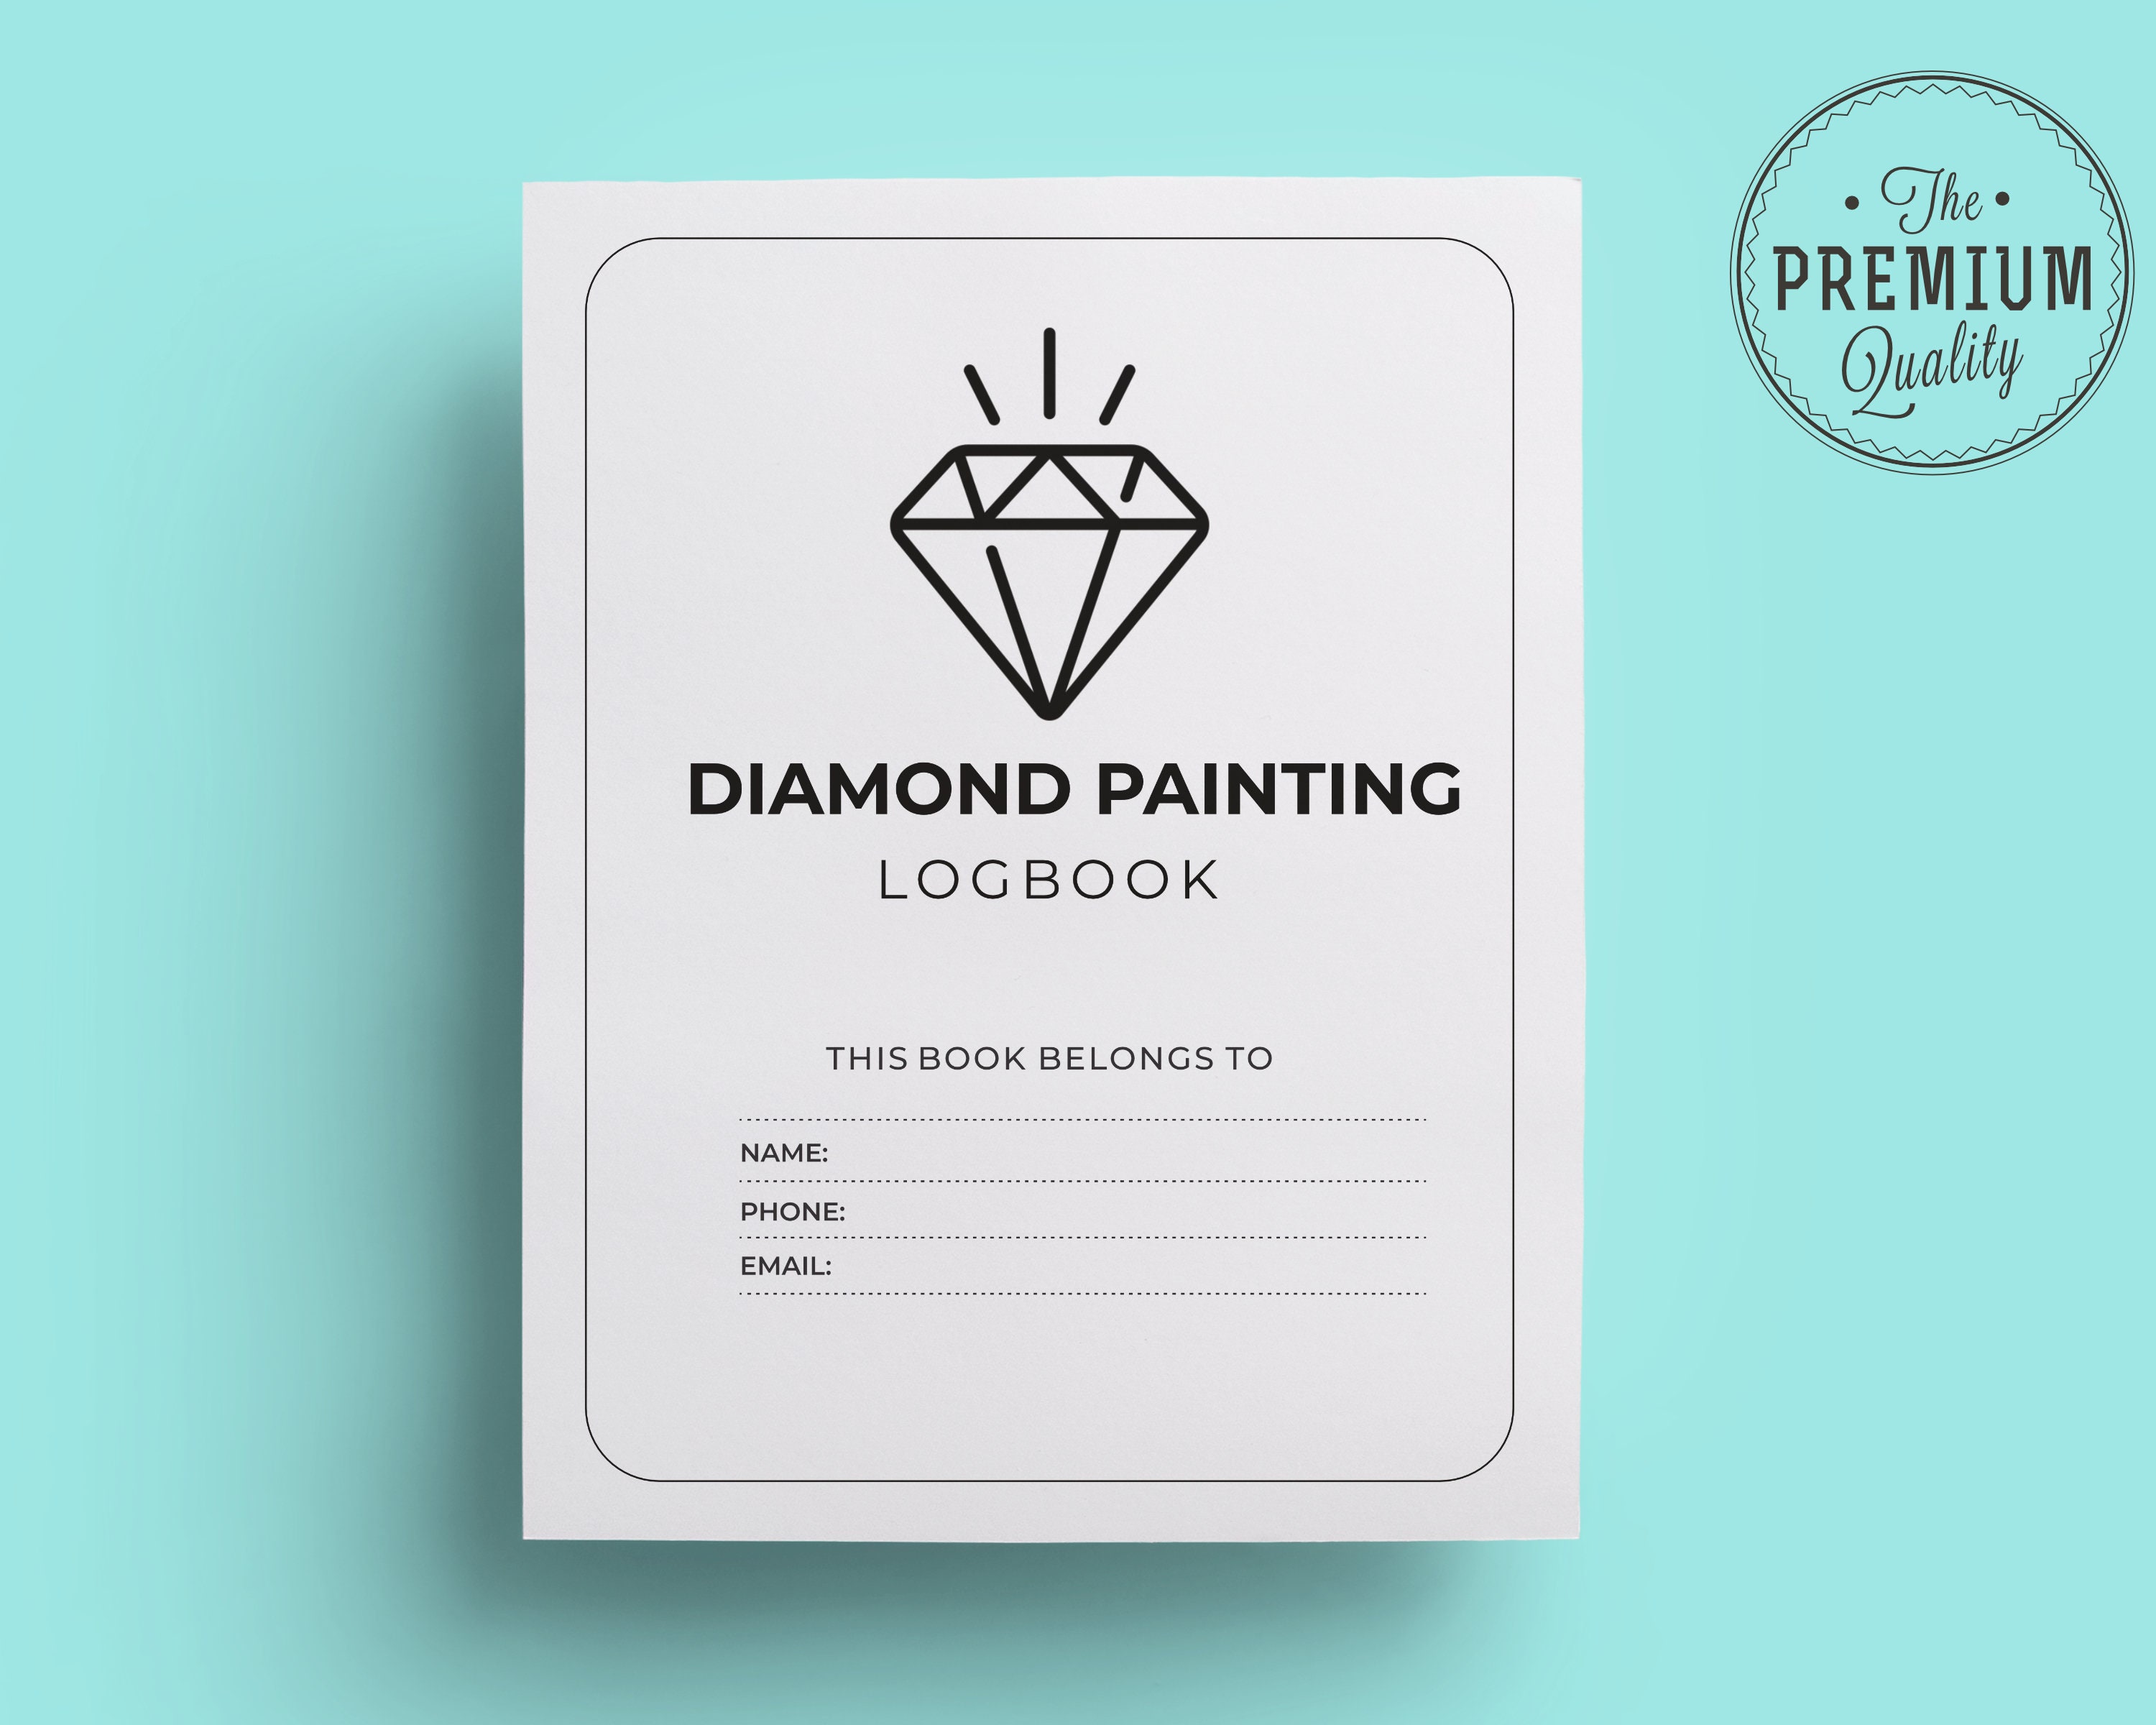 Diamond Painting designs, themes, templates and downloadable